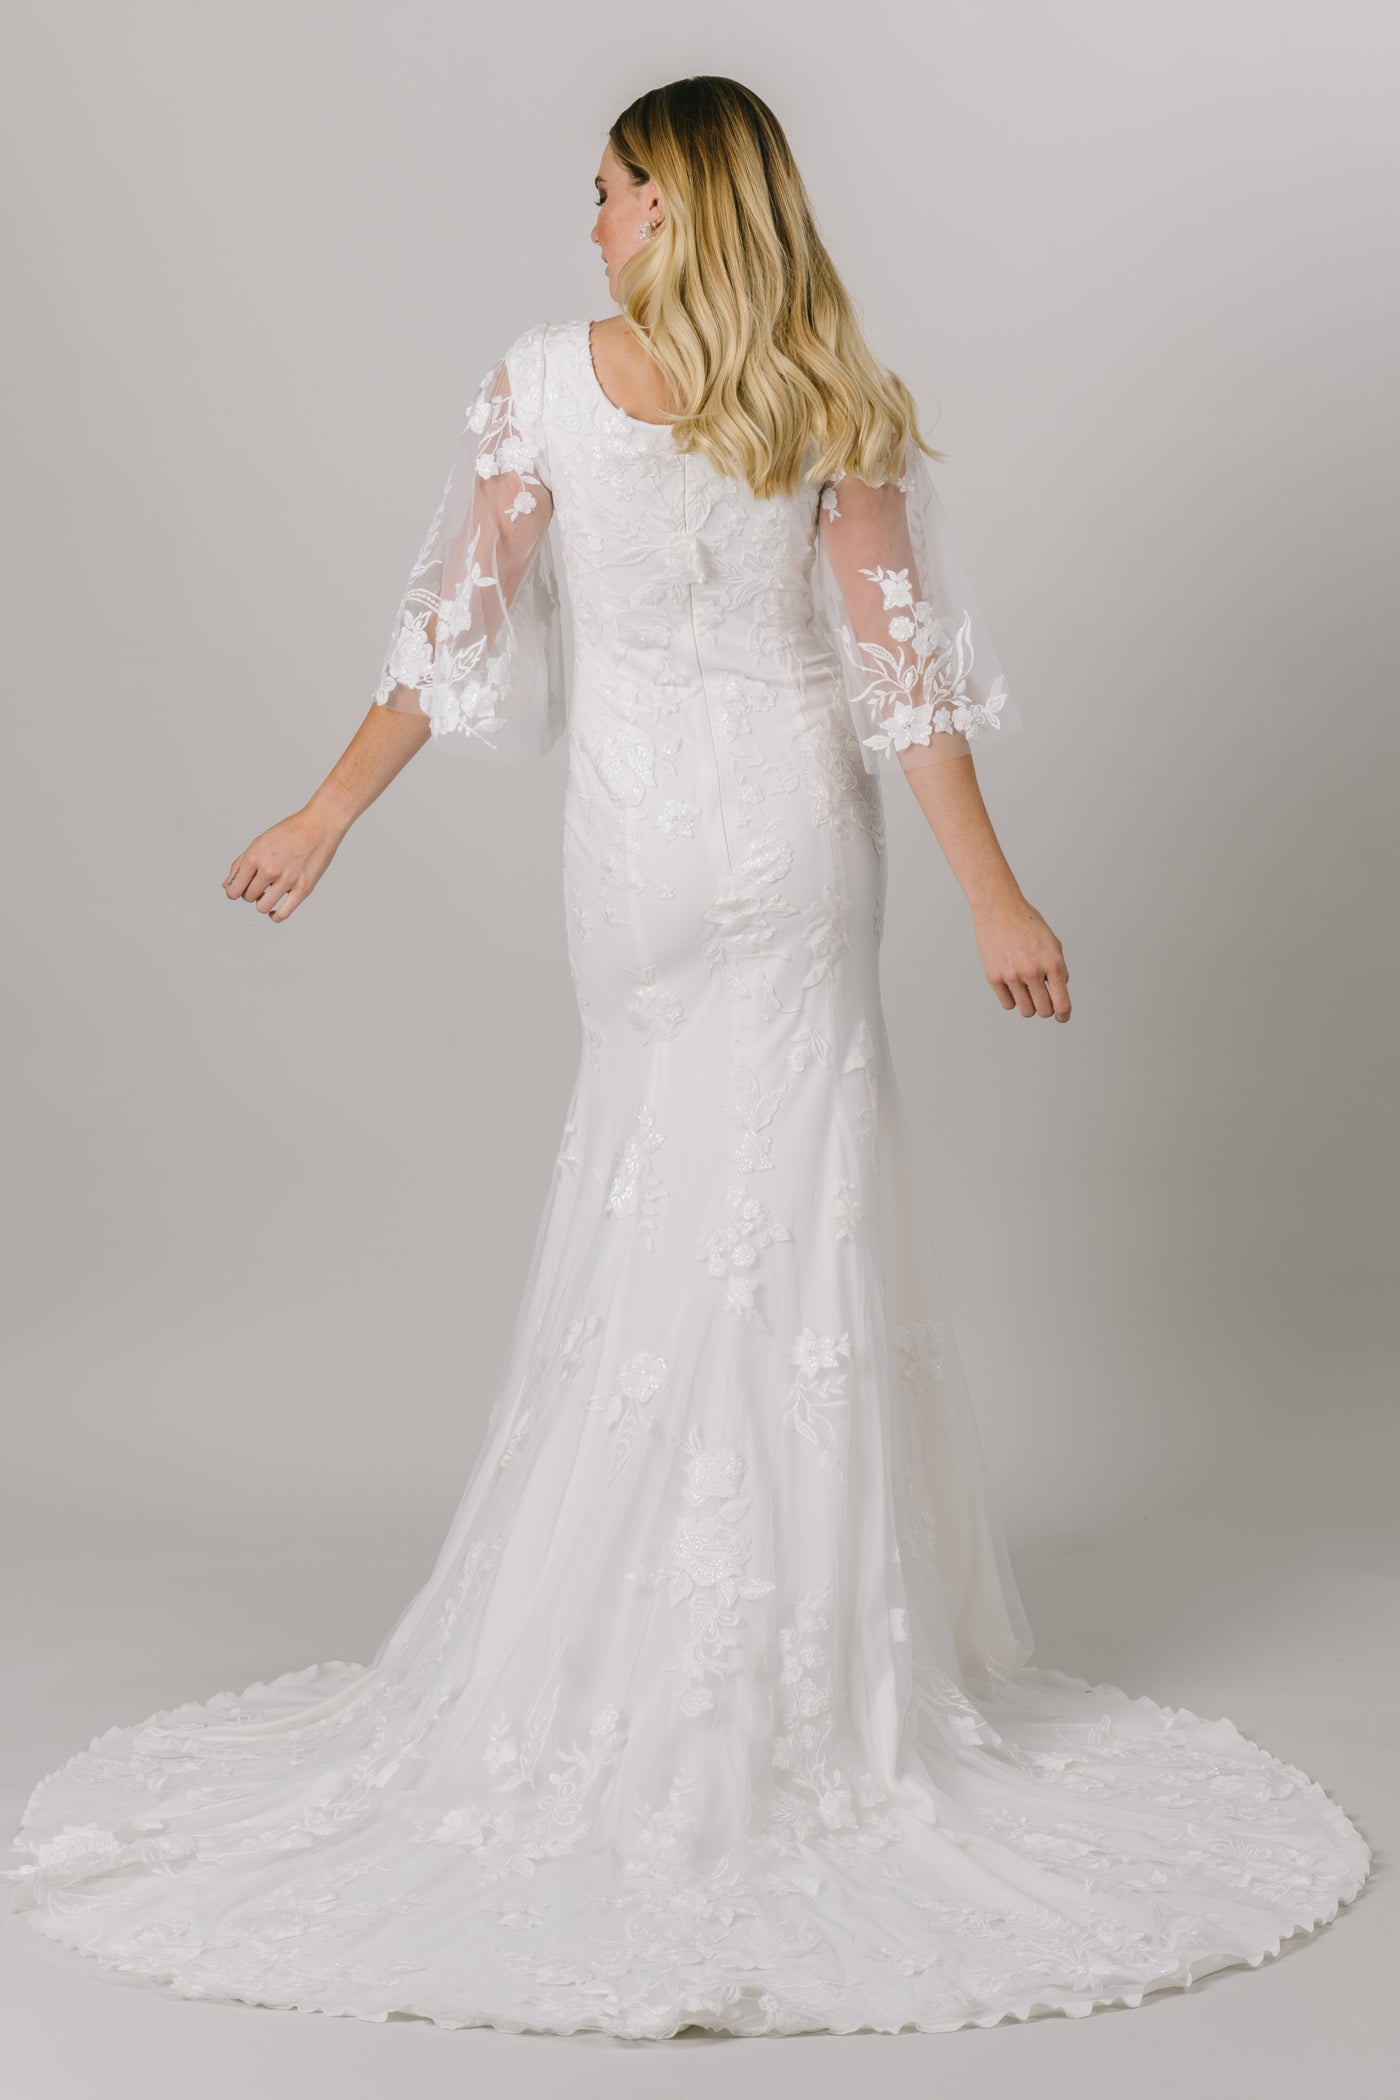 This unique modest wedding gown is like nothing you've seen! It features a v-neckline, fitted silhouette, and gorgeous flowery lace. This gown provides such an amazing fit with details you'll love! Available in Ivory and Ivory/DecoGold. From a bridal shop in downtown Salt Lake City called LatterDayBride.